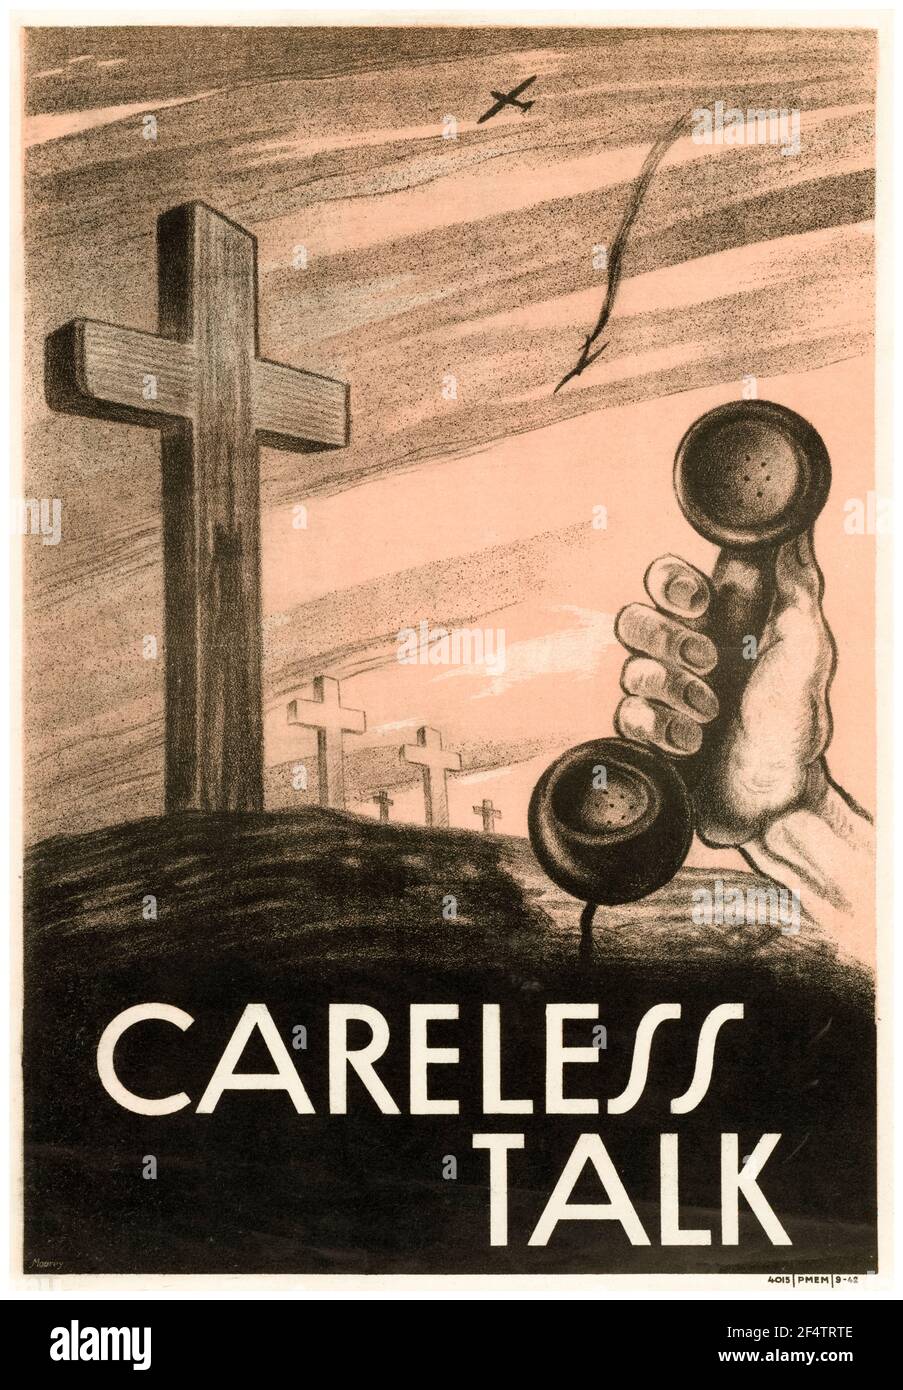 British, WW2 Careless Talk, Public Information Poster, (Telephone and Graves), 1942-1945 Stock Photo